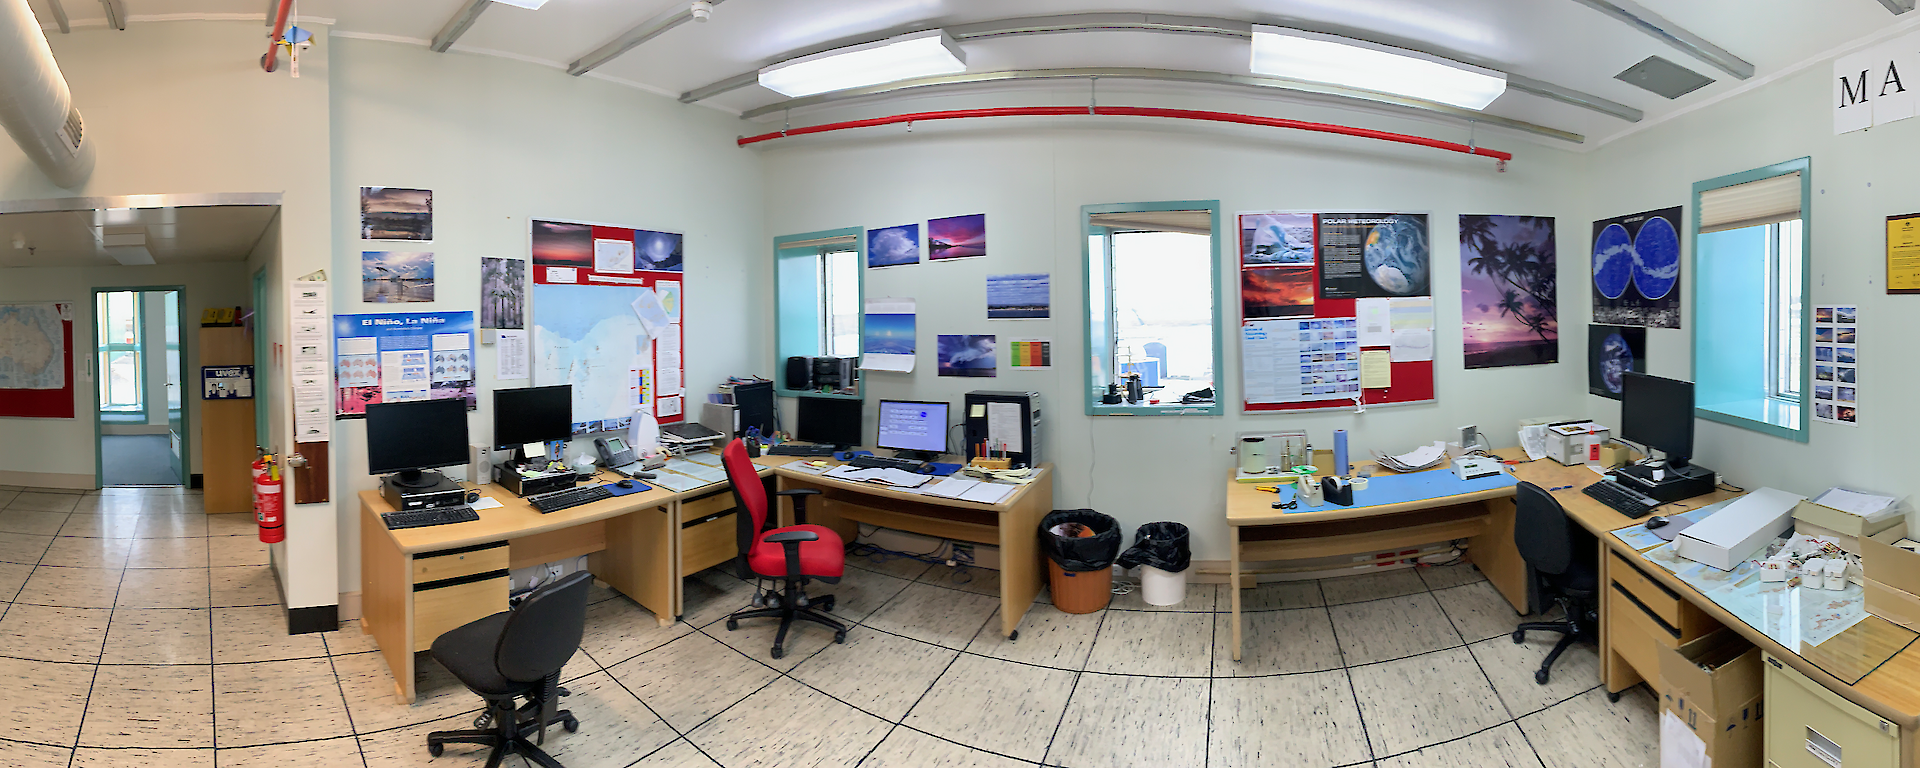 The Mawson Meteorology office.